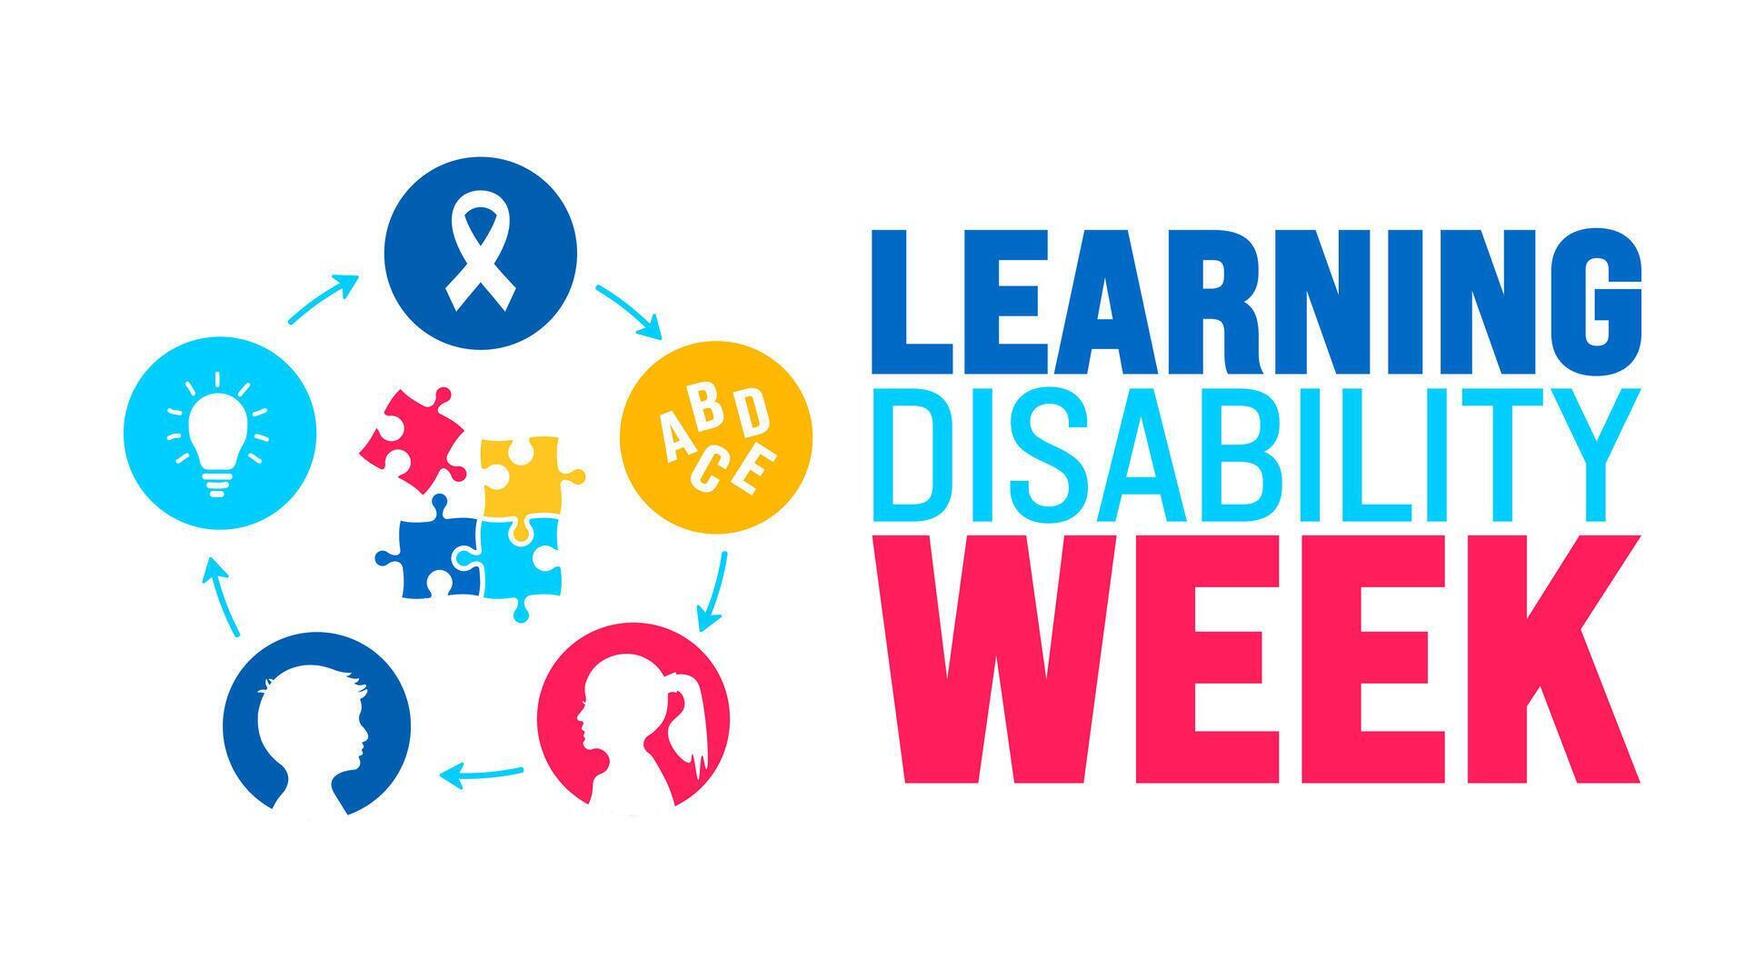 June is Learning Disability Week background template. Holiday concept. use to background, banner, placard, card, and poster design template with text inscription and standard color. vector